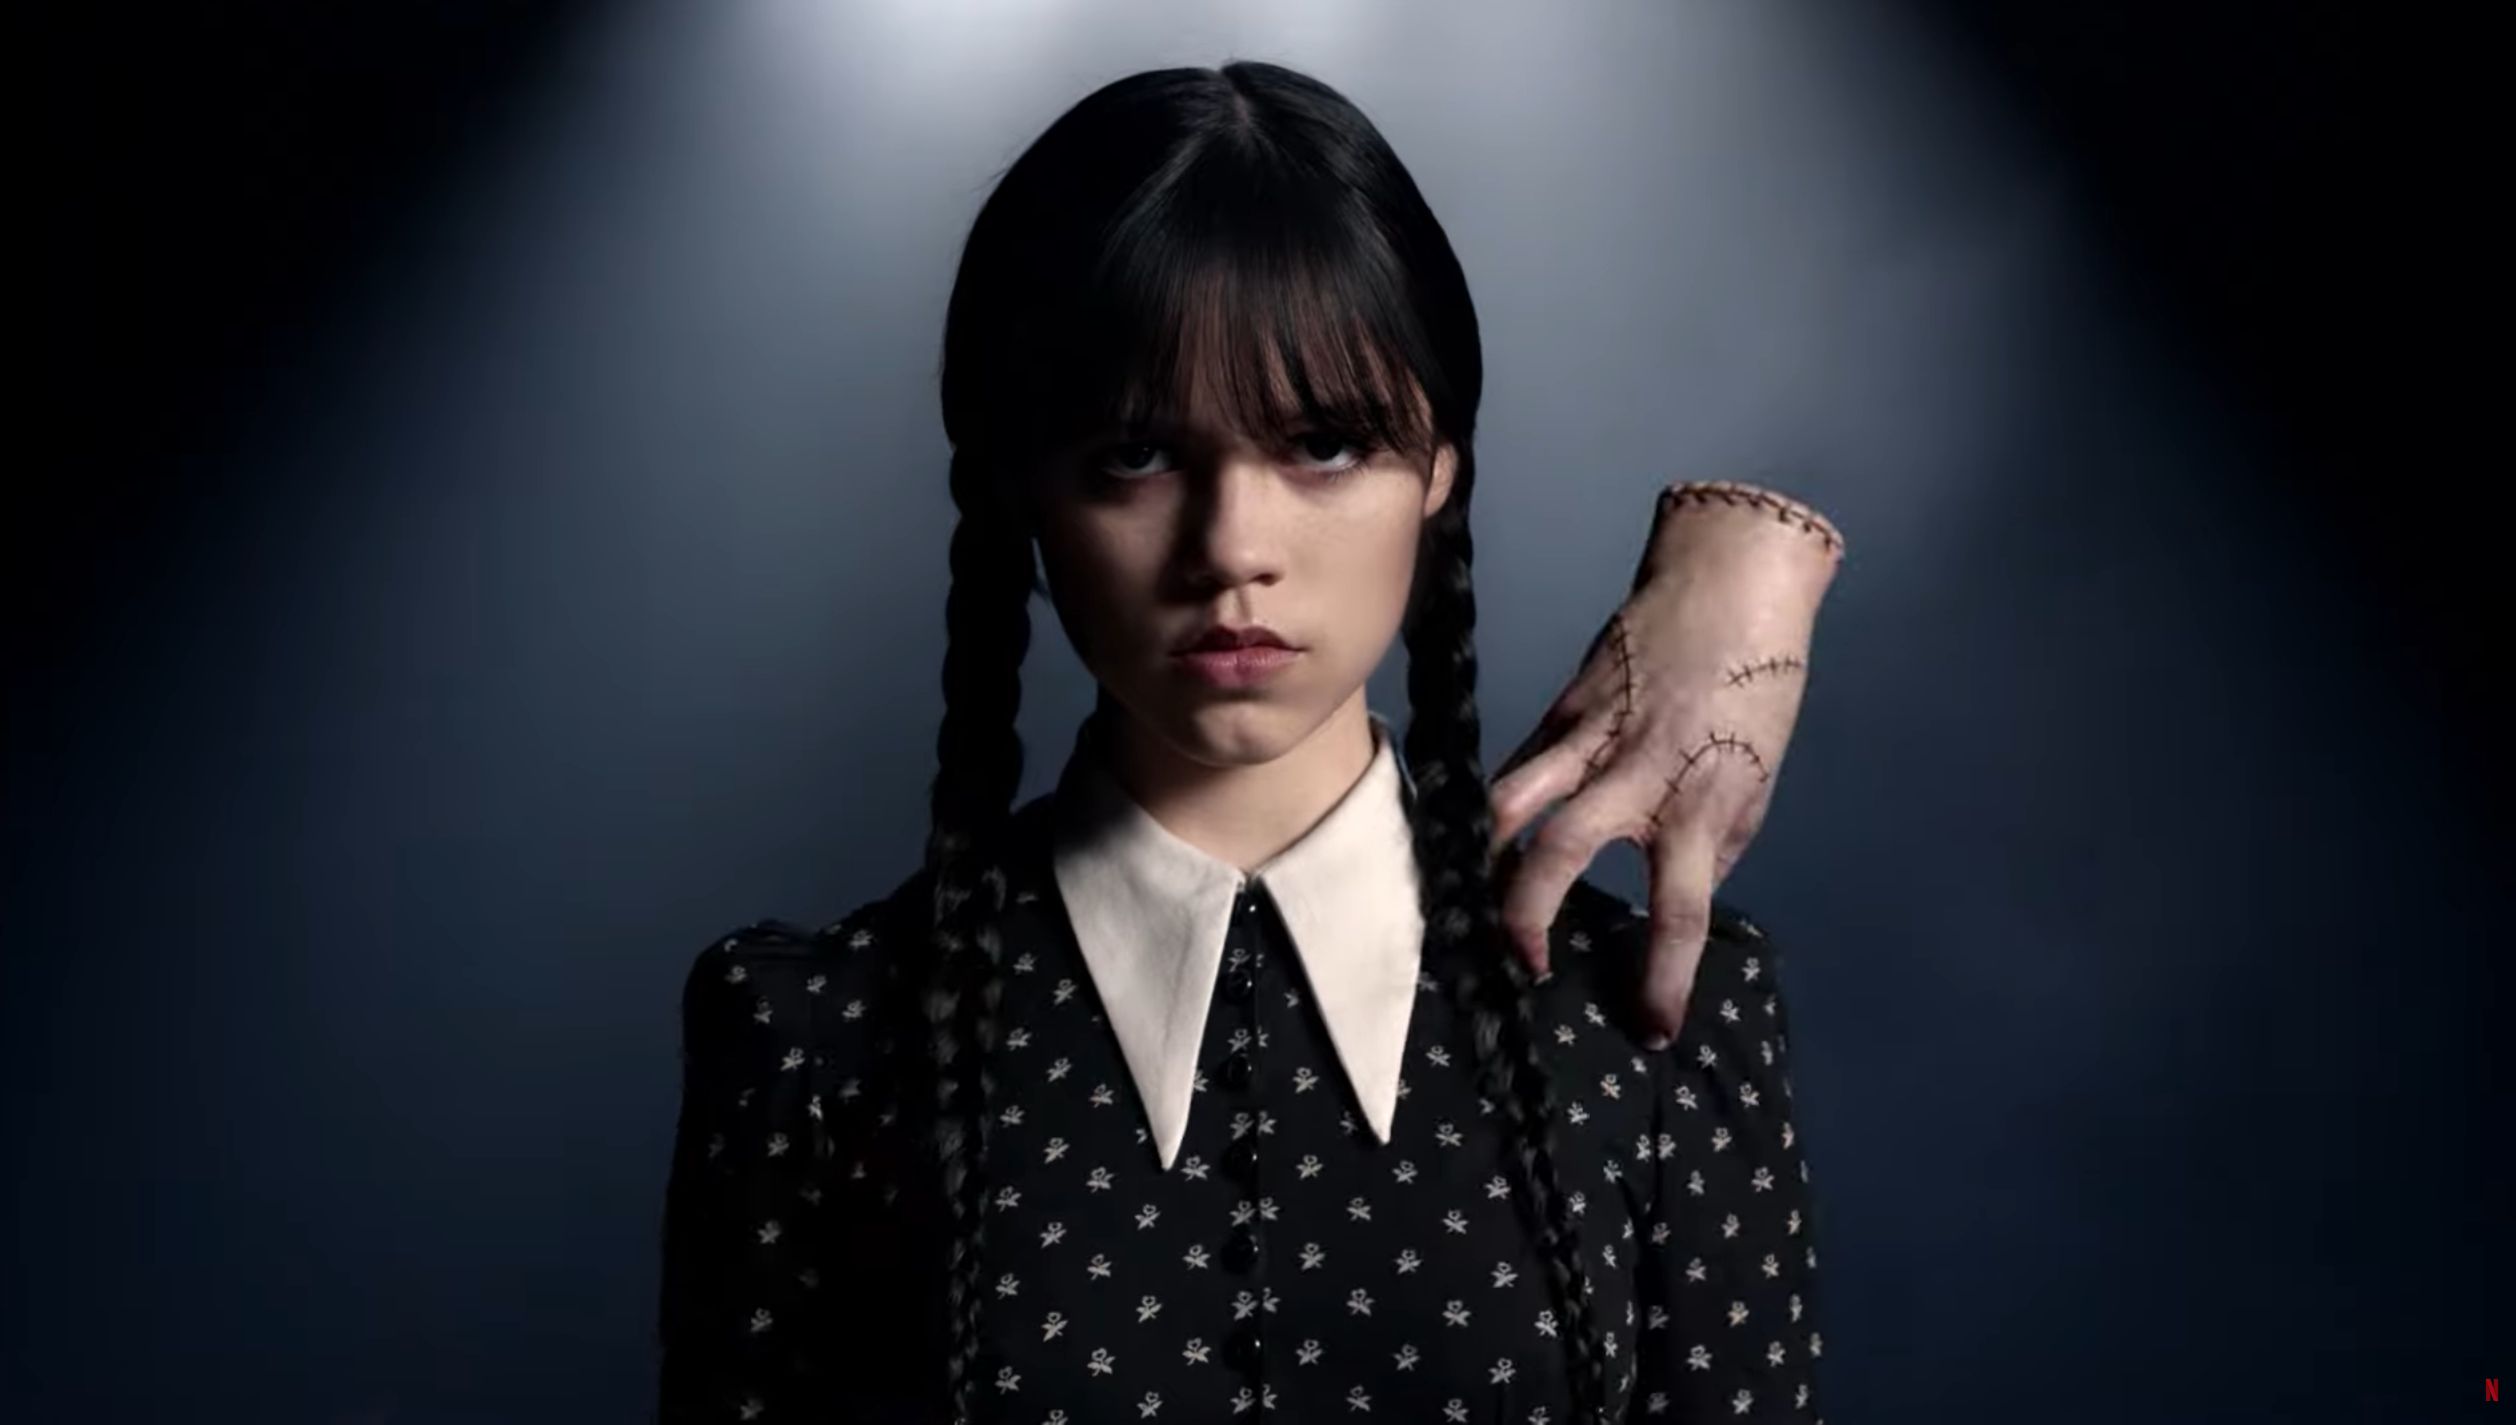 The Addams Family is making a comeback on Netflix: Trailer introduces Wednesday